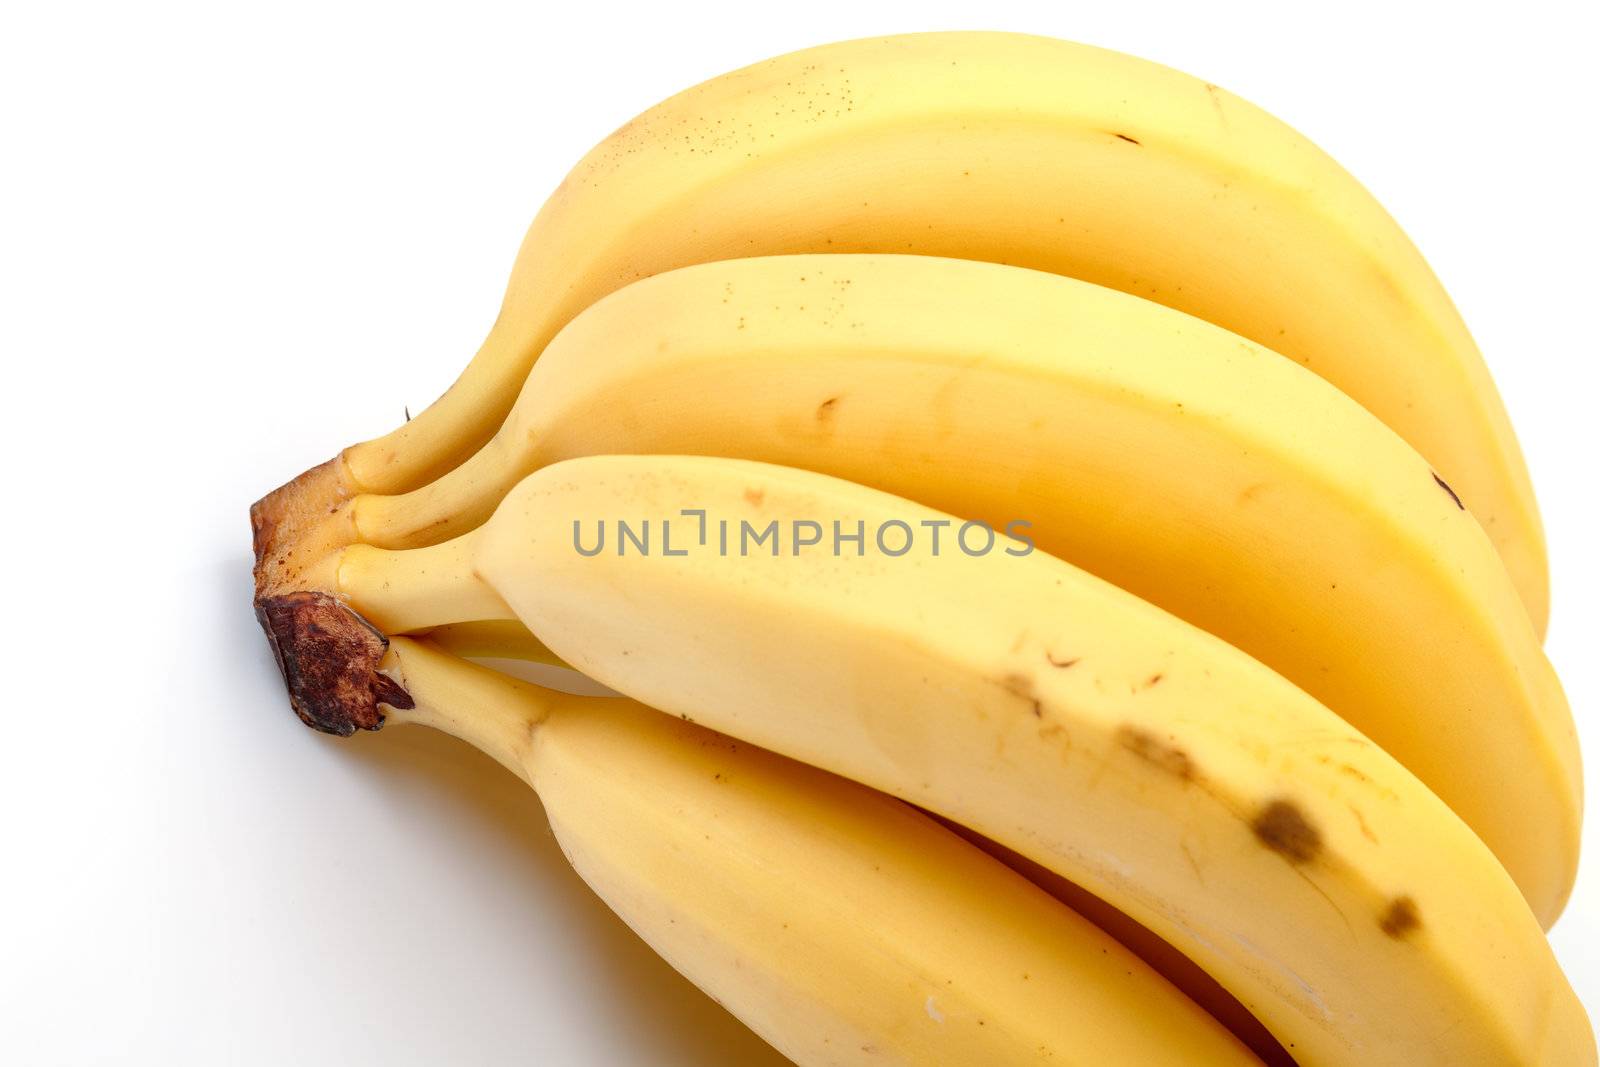 Bunch of Bananas on white background